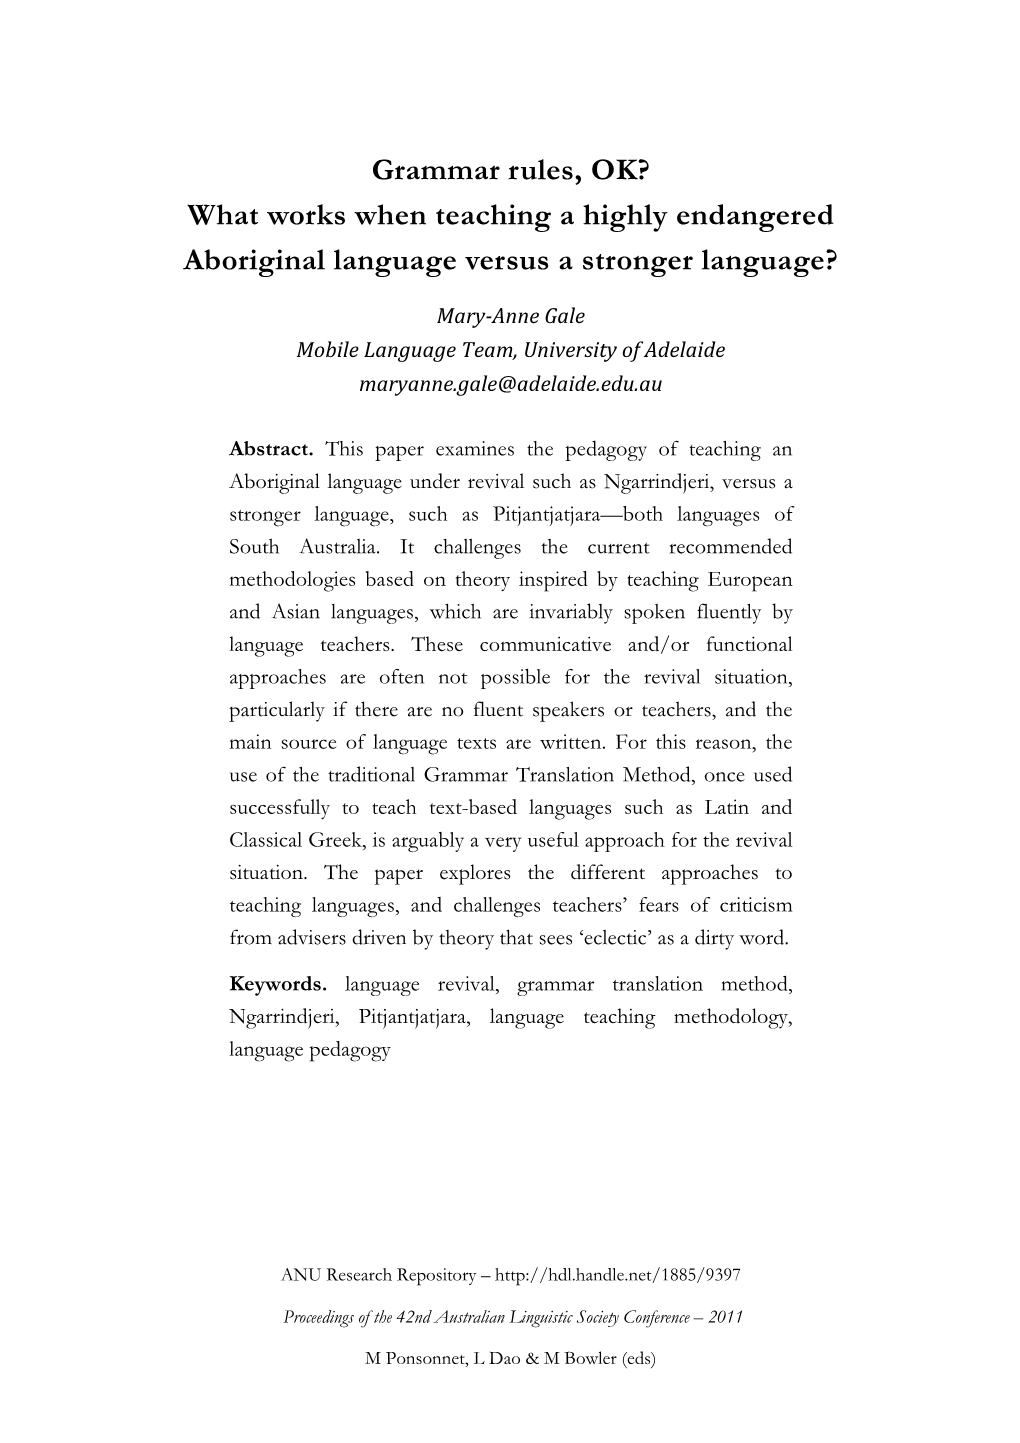 Grammar Rules, OK? What Works When Teaching a Highly Endangered Aboriginal Language Versus a Stronger Language?